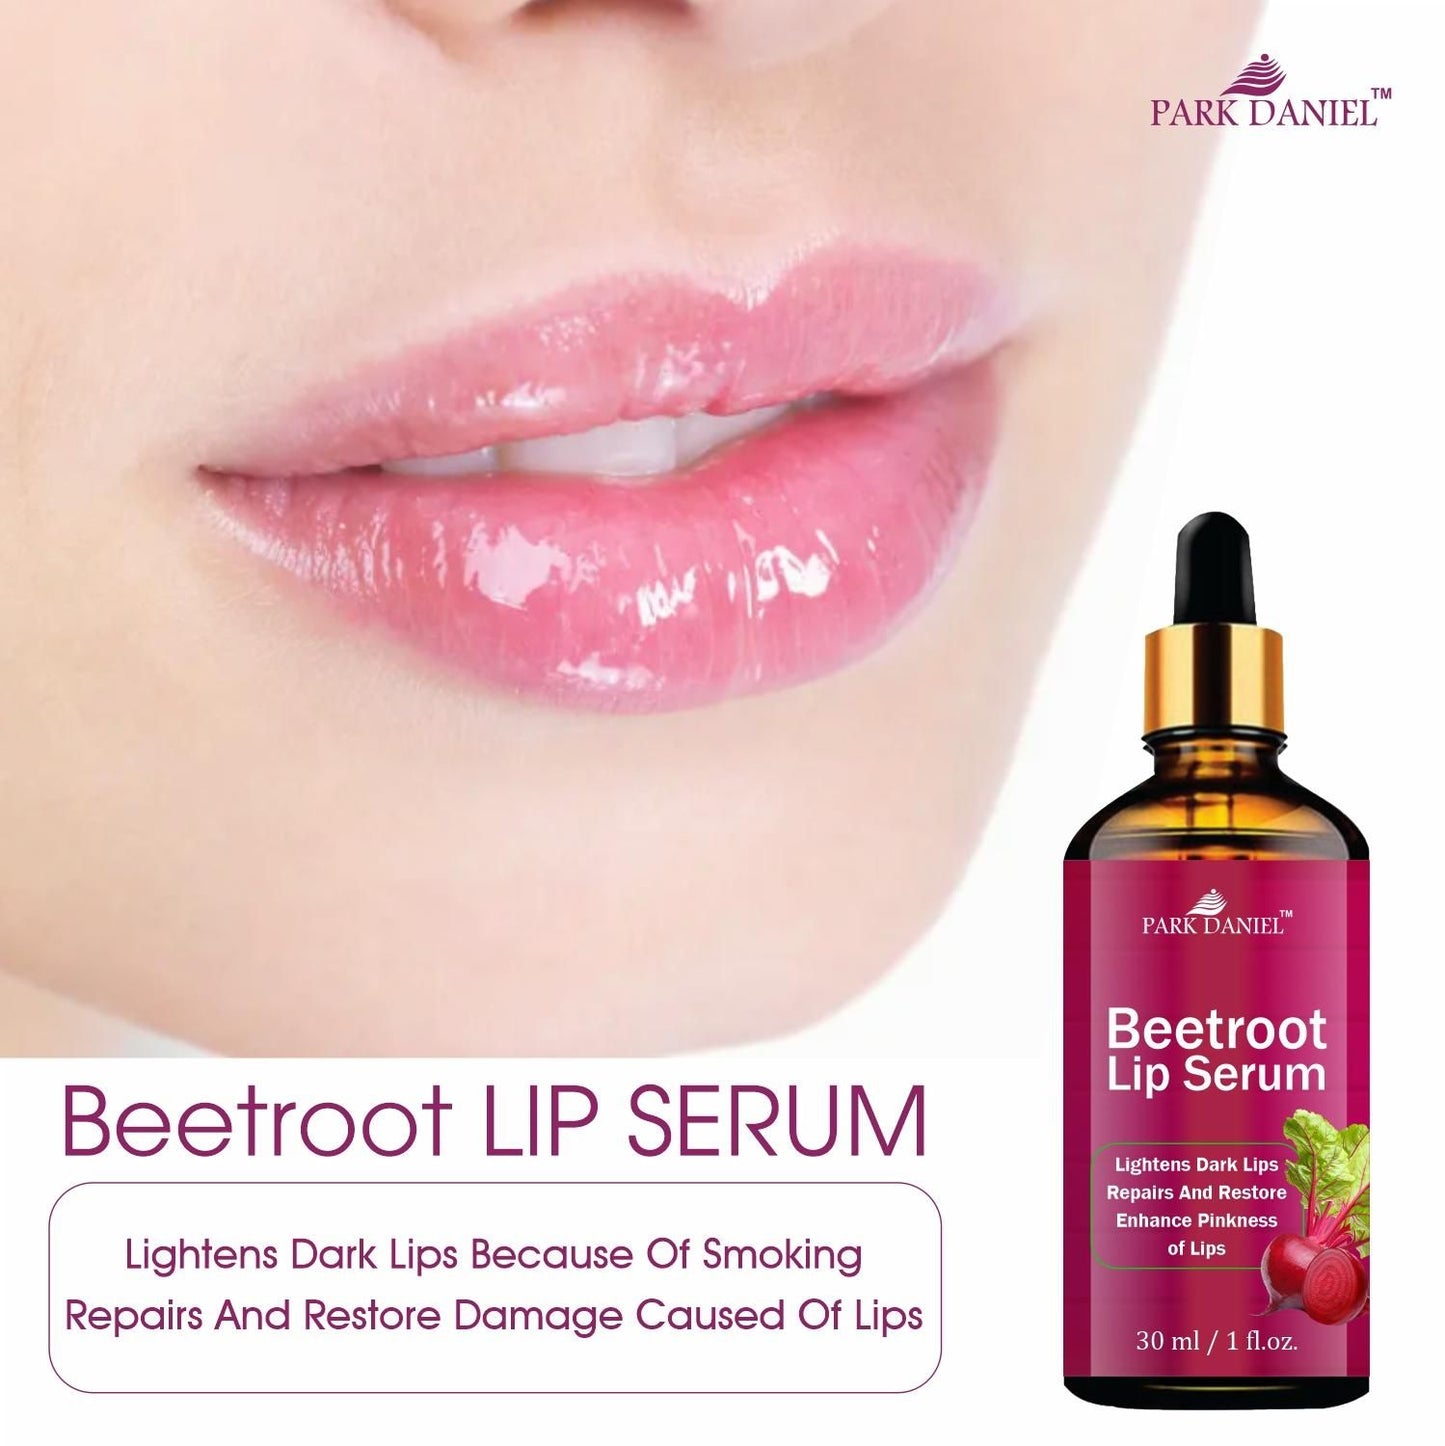 Park Daniel Beetroot Lip Serum Oil- For Soft and Shiny Lips (30ml)